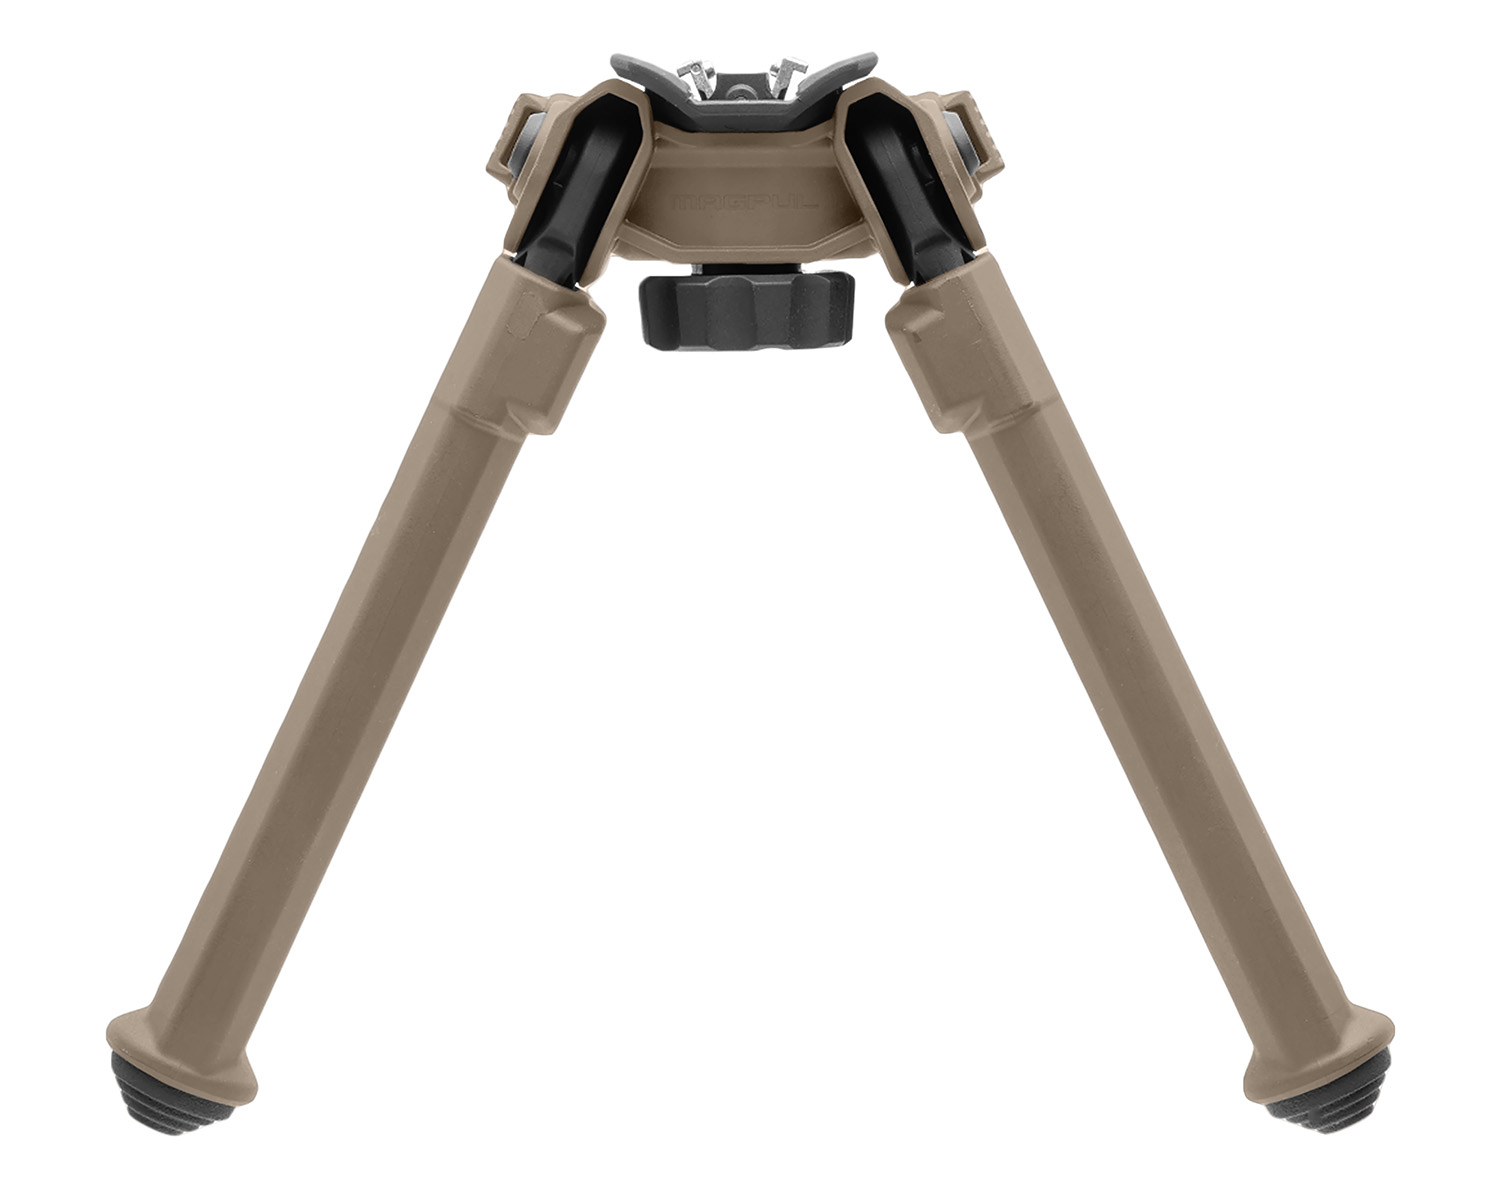 Magpul MAG1174-FDE MOE Bipod made of Polymer with Flat Dark Earth Finish, Rubber Feet, 7-10